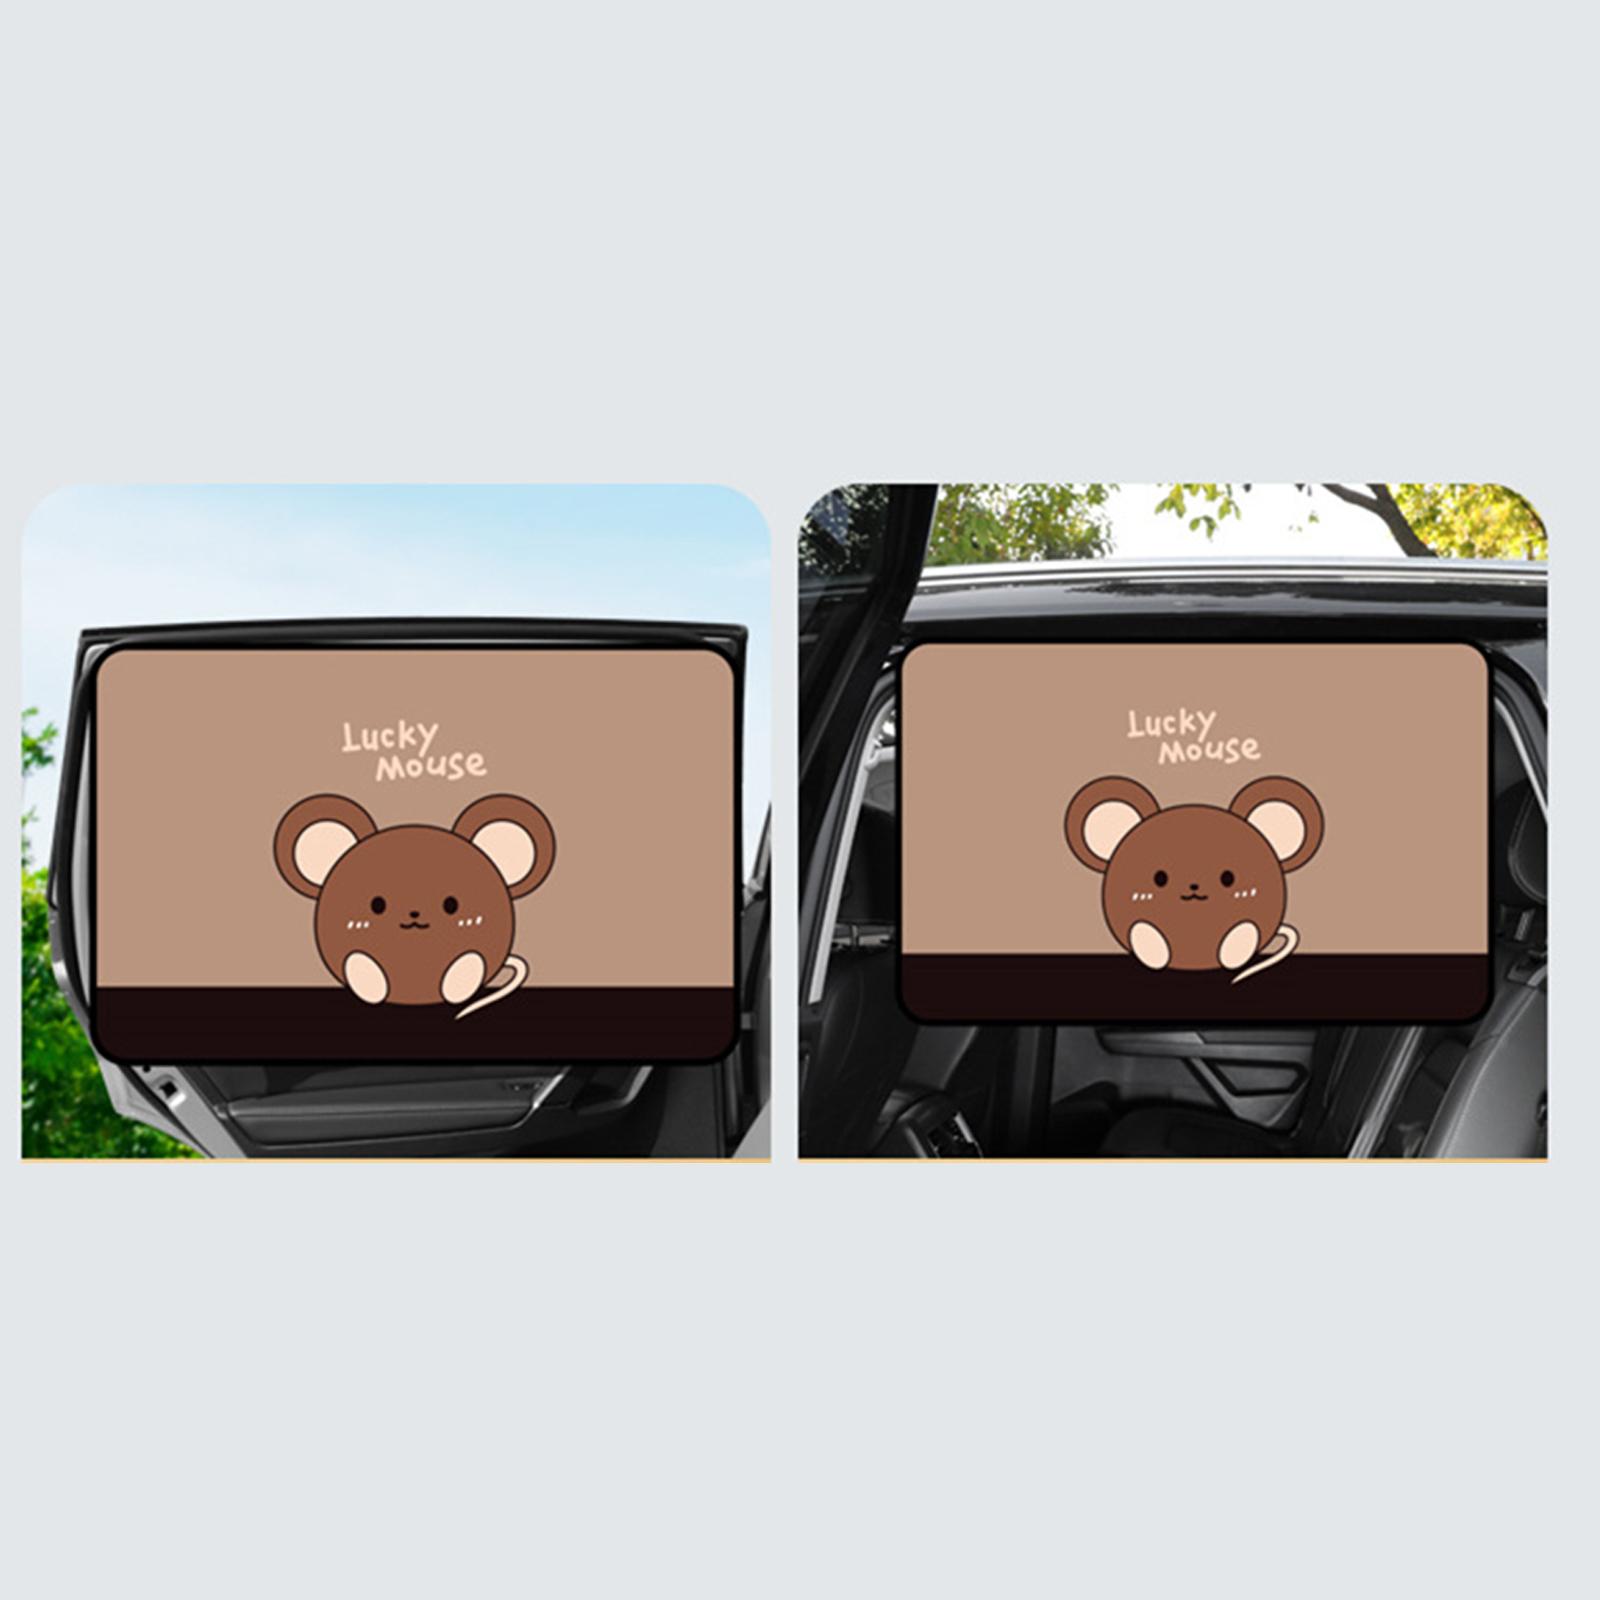 Generic Privacy Curtain Magnetic Car Window Shade for SUV Trucks Travel Brown Rear